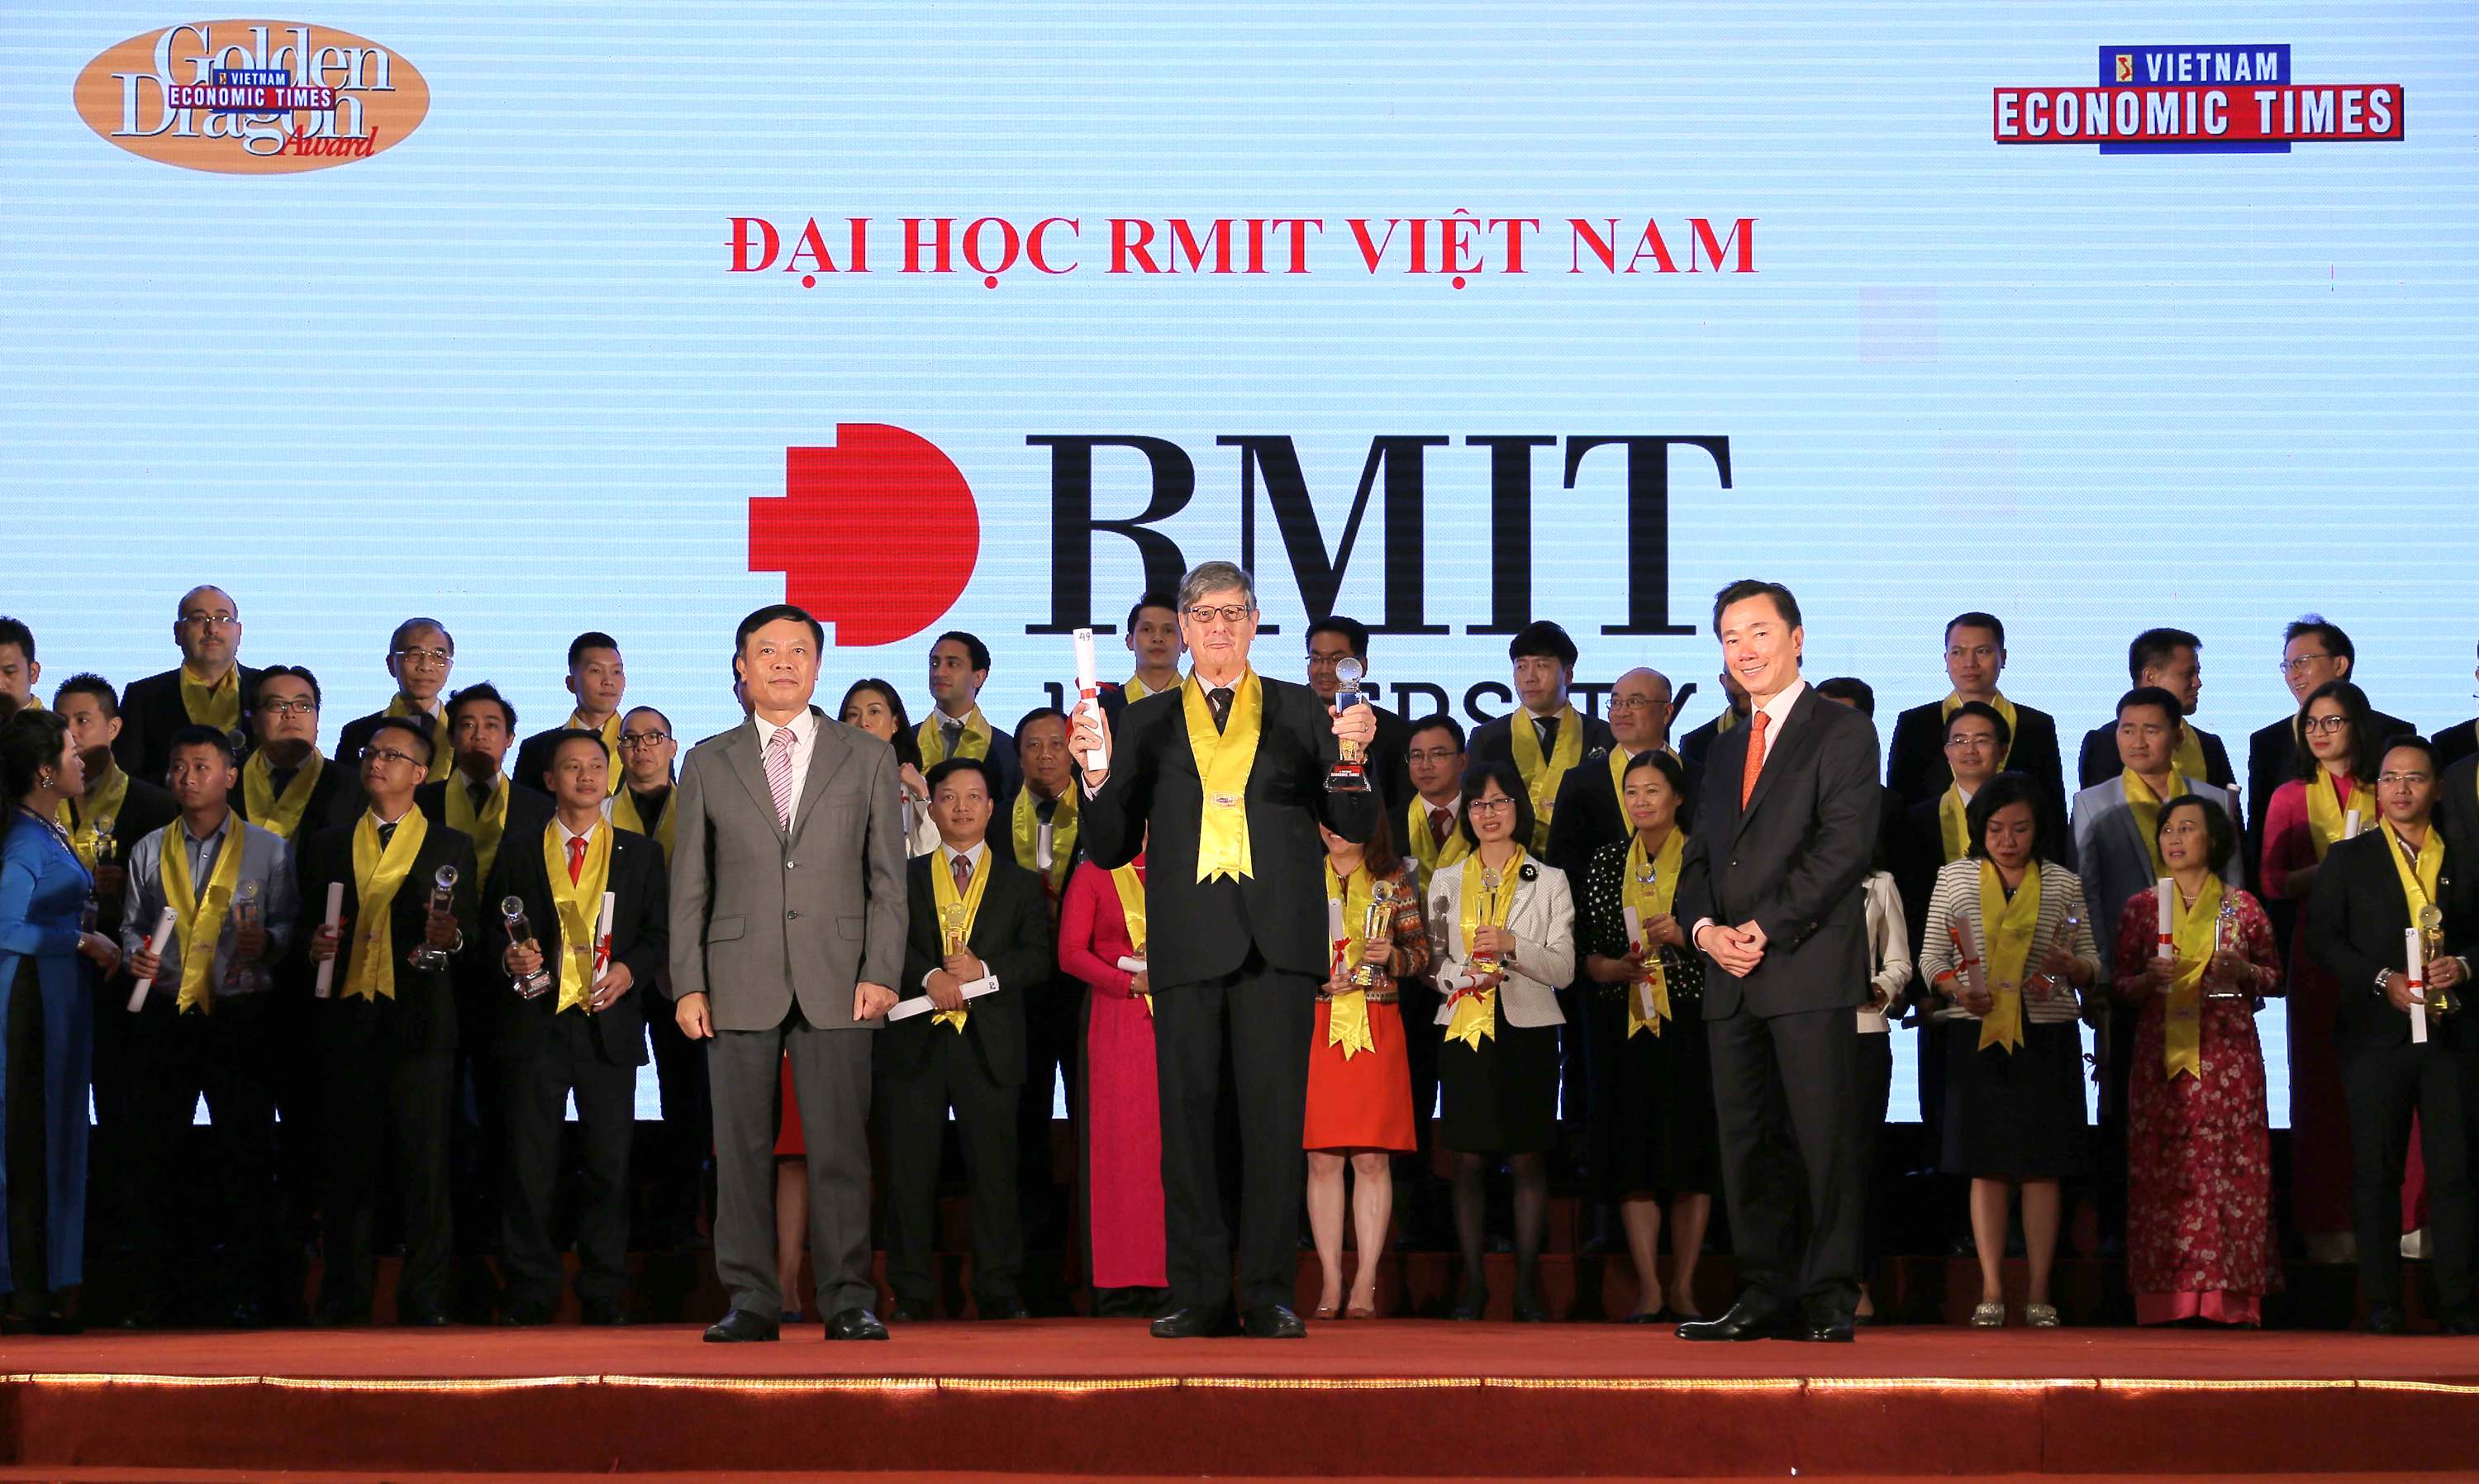 RMIT Vietnam’s Director of Communications and Events Mr Conrad Ożóg accepted the Golden Dragon Award at a ceremony on 8 April 2017.